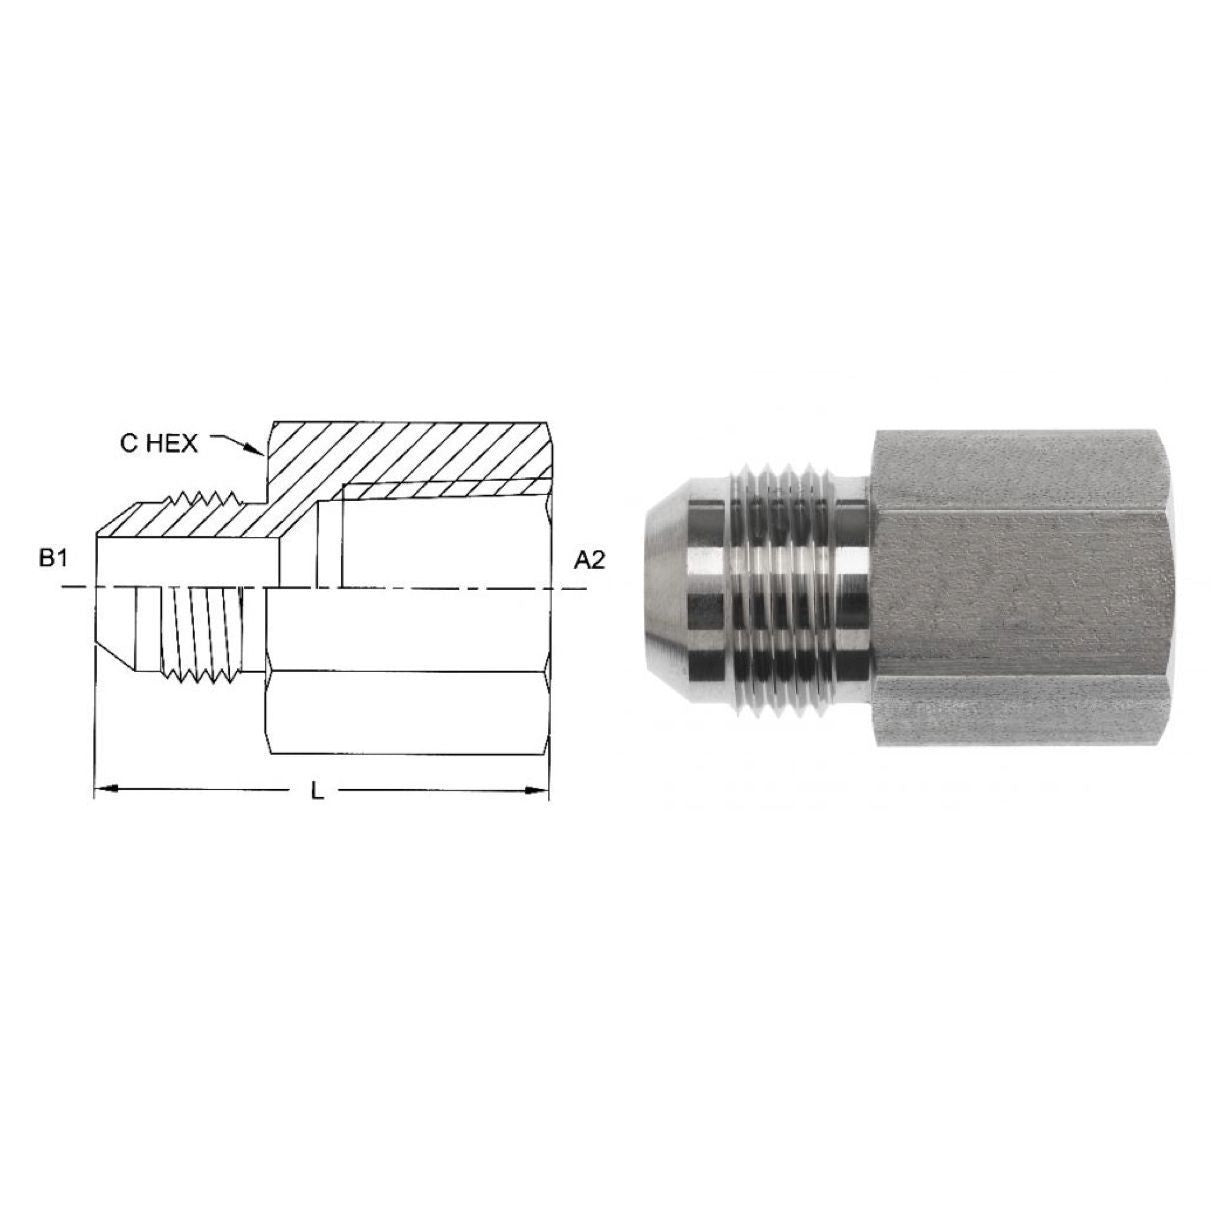 2405-20-20 : OneHydraulics  Adapter, Straight, 1.25 (1-1/4") Male NPT x 1.25 (1-1/4") Female, Steel, 2500psi